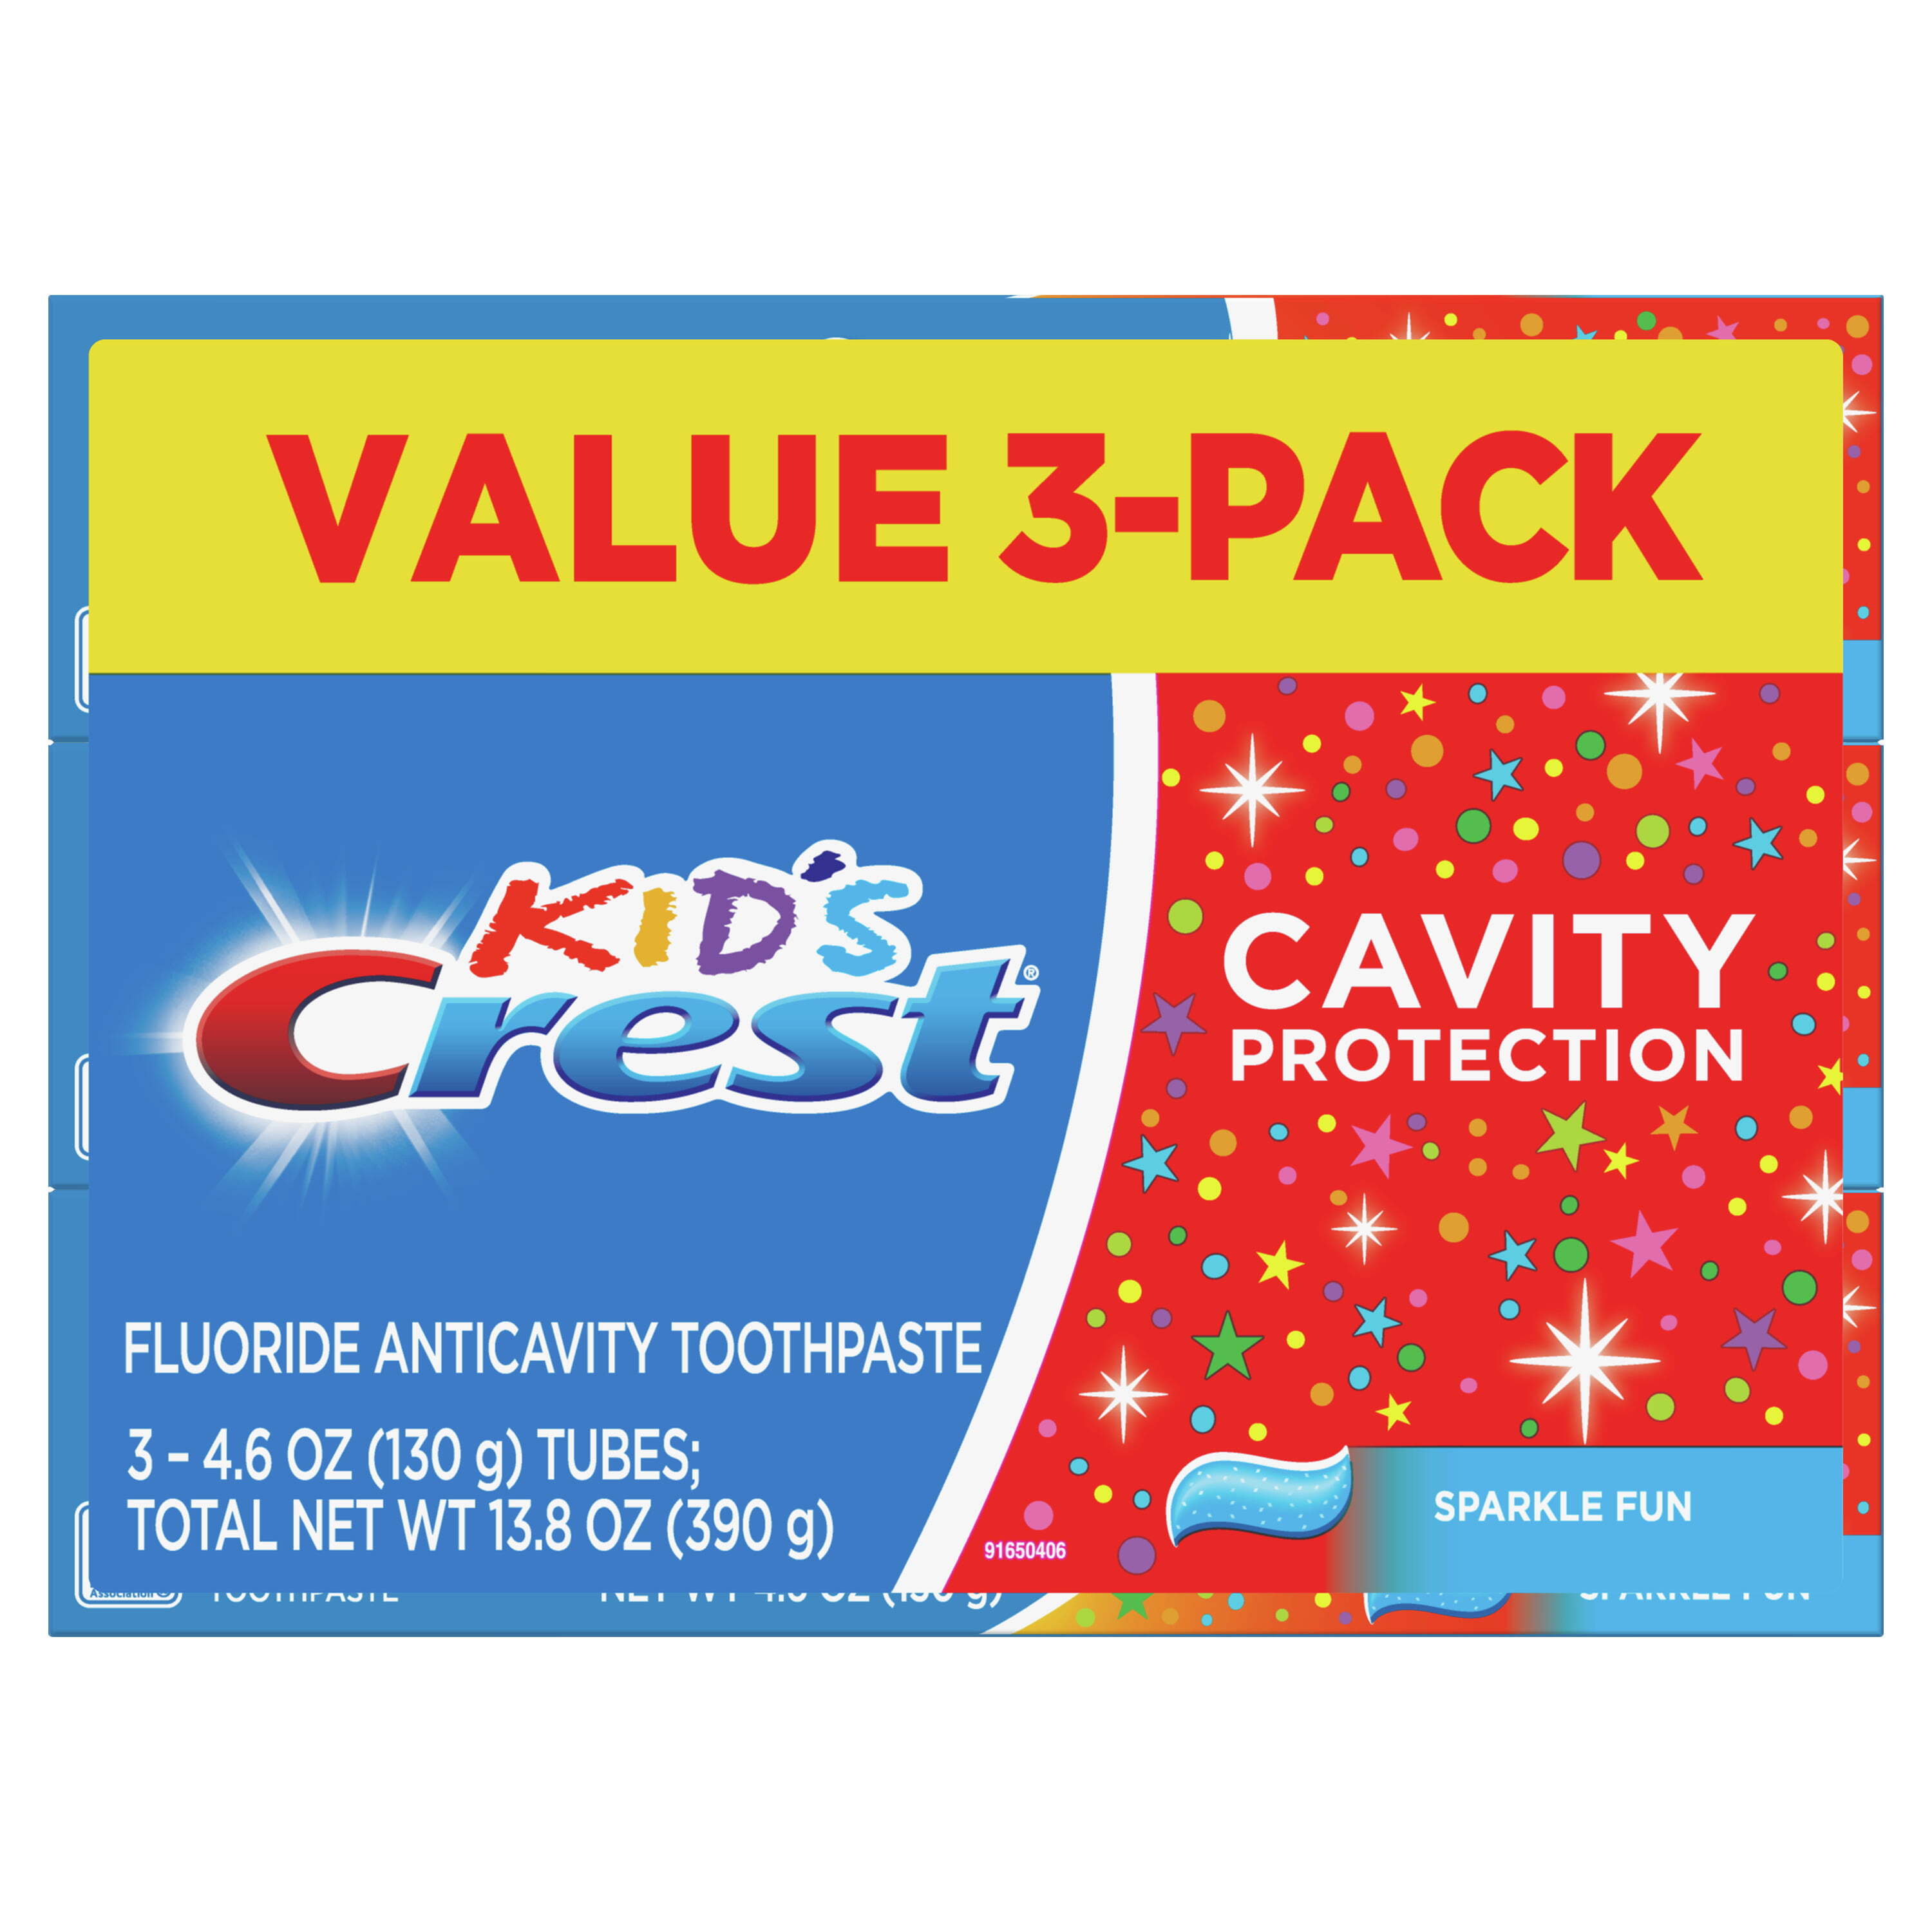 Crest Kids Cavity Protection Toothpaste, Sparkle Fun Flavor, 4.6 oz 3 Pack - image 1 of 8